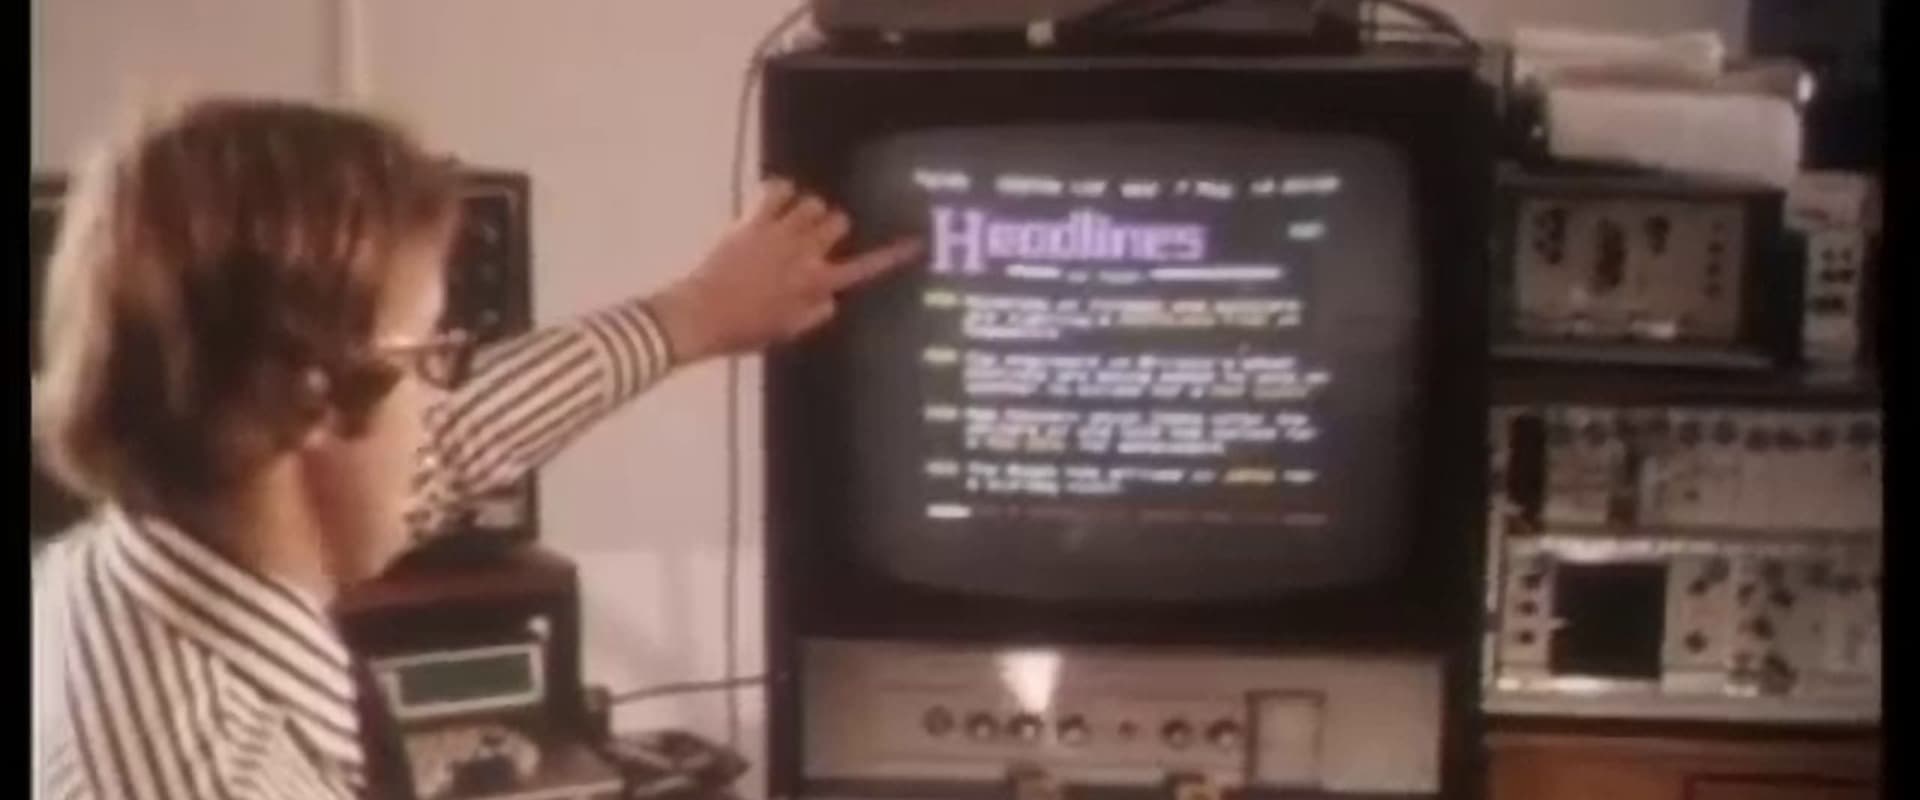 This is CEEFAX